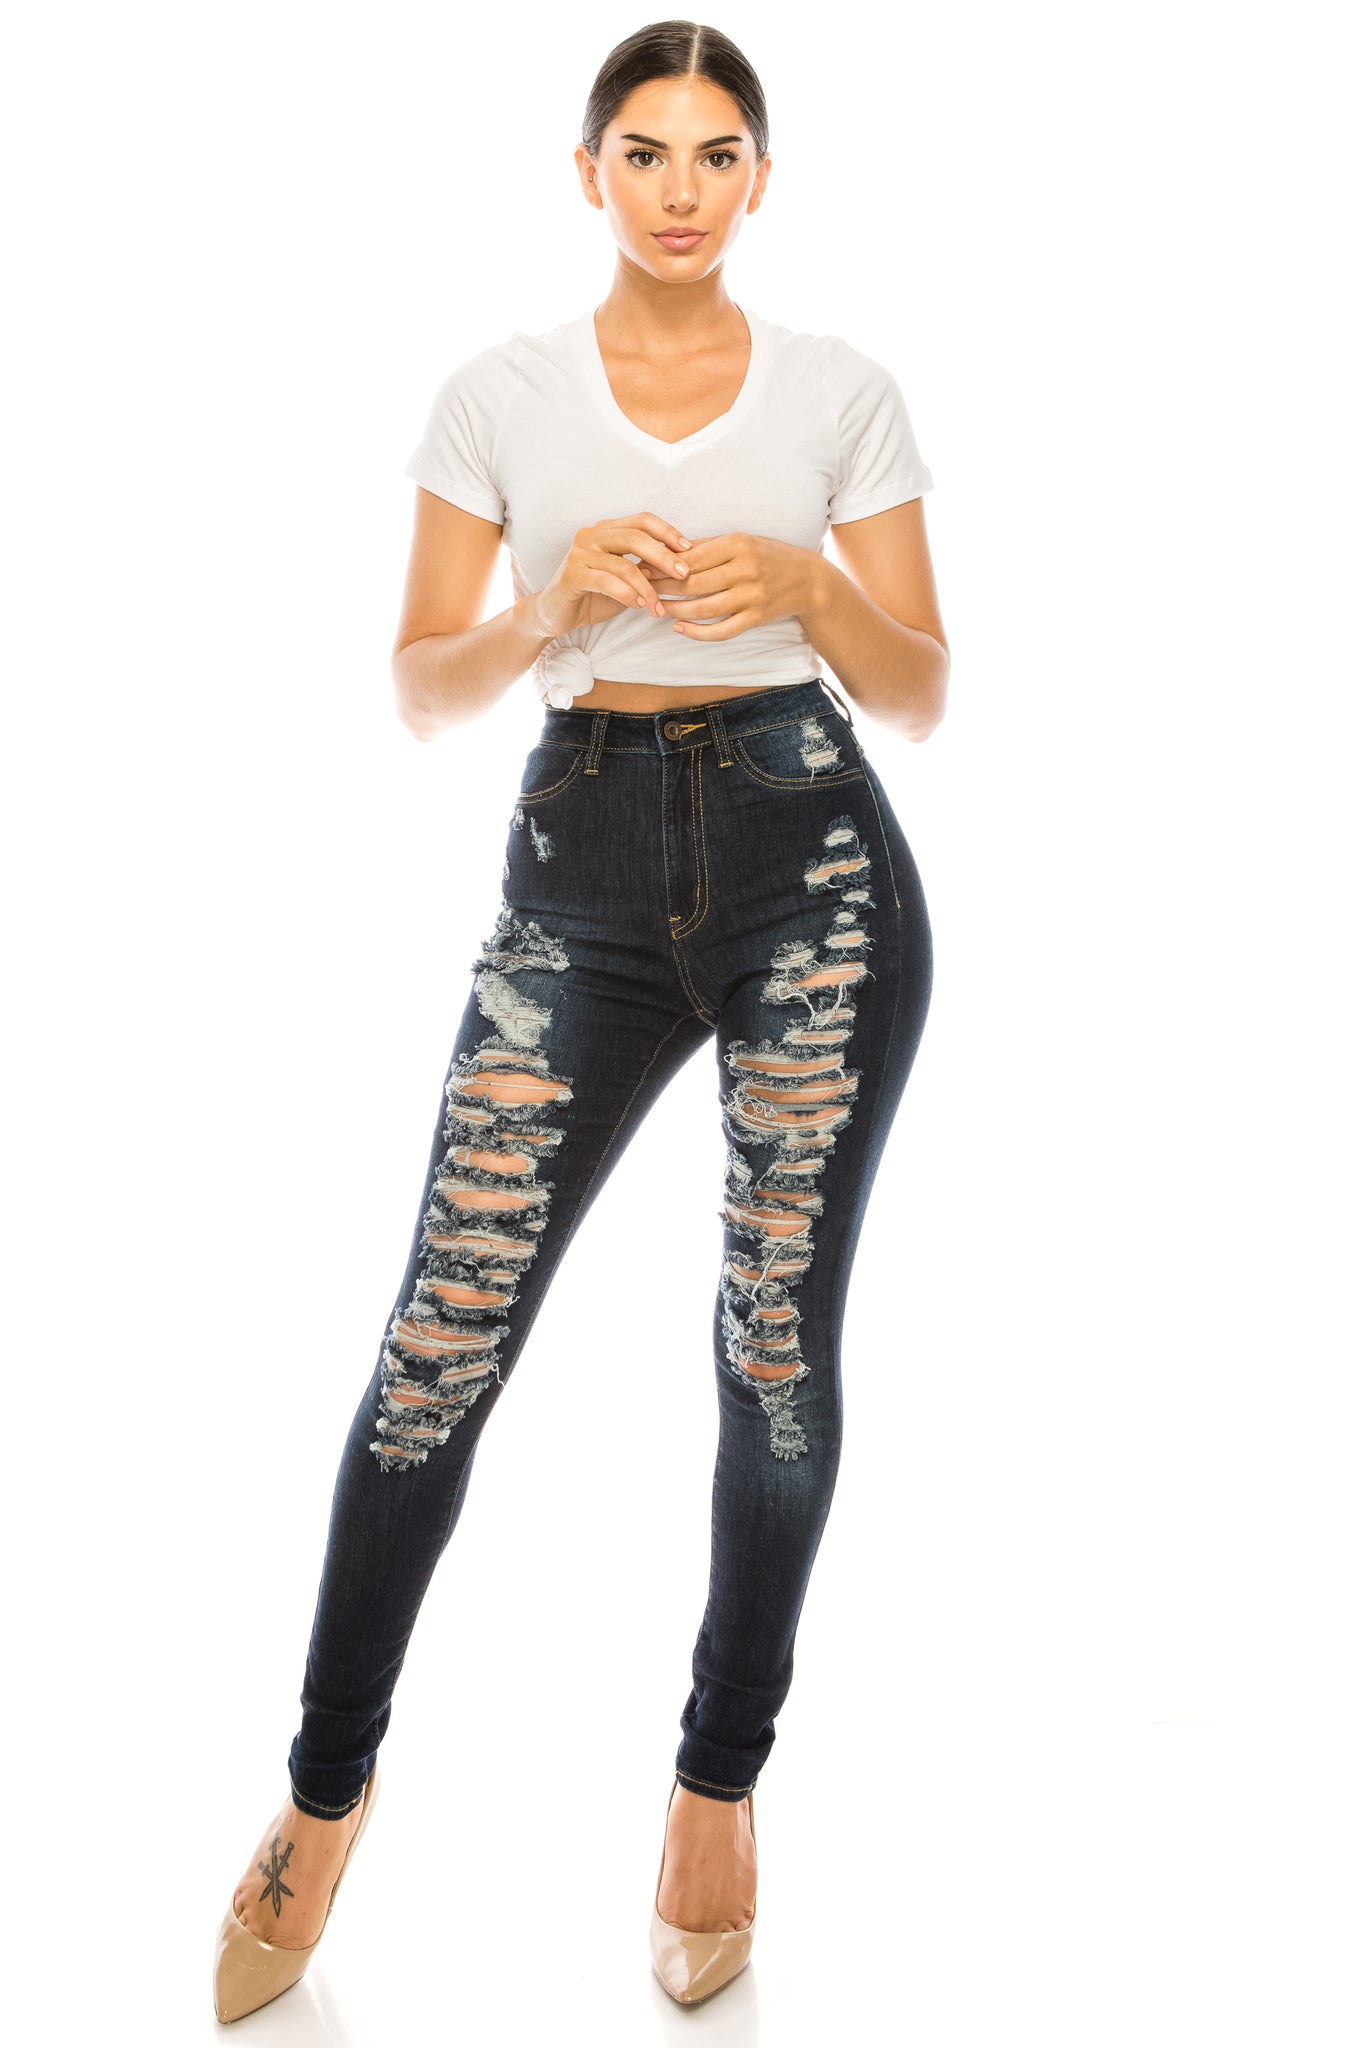 Aphrodite High Waisted Jeans for Women - Plus Size Hand Sanding